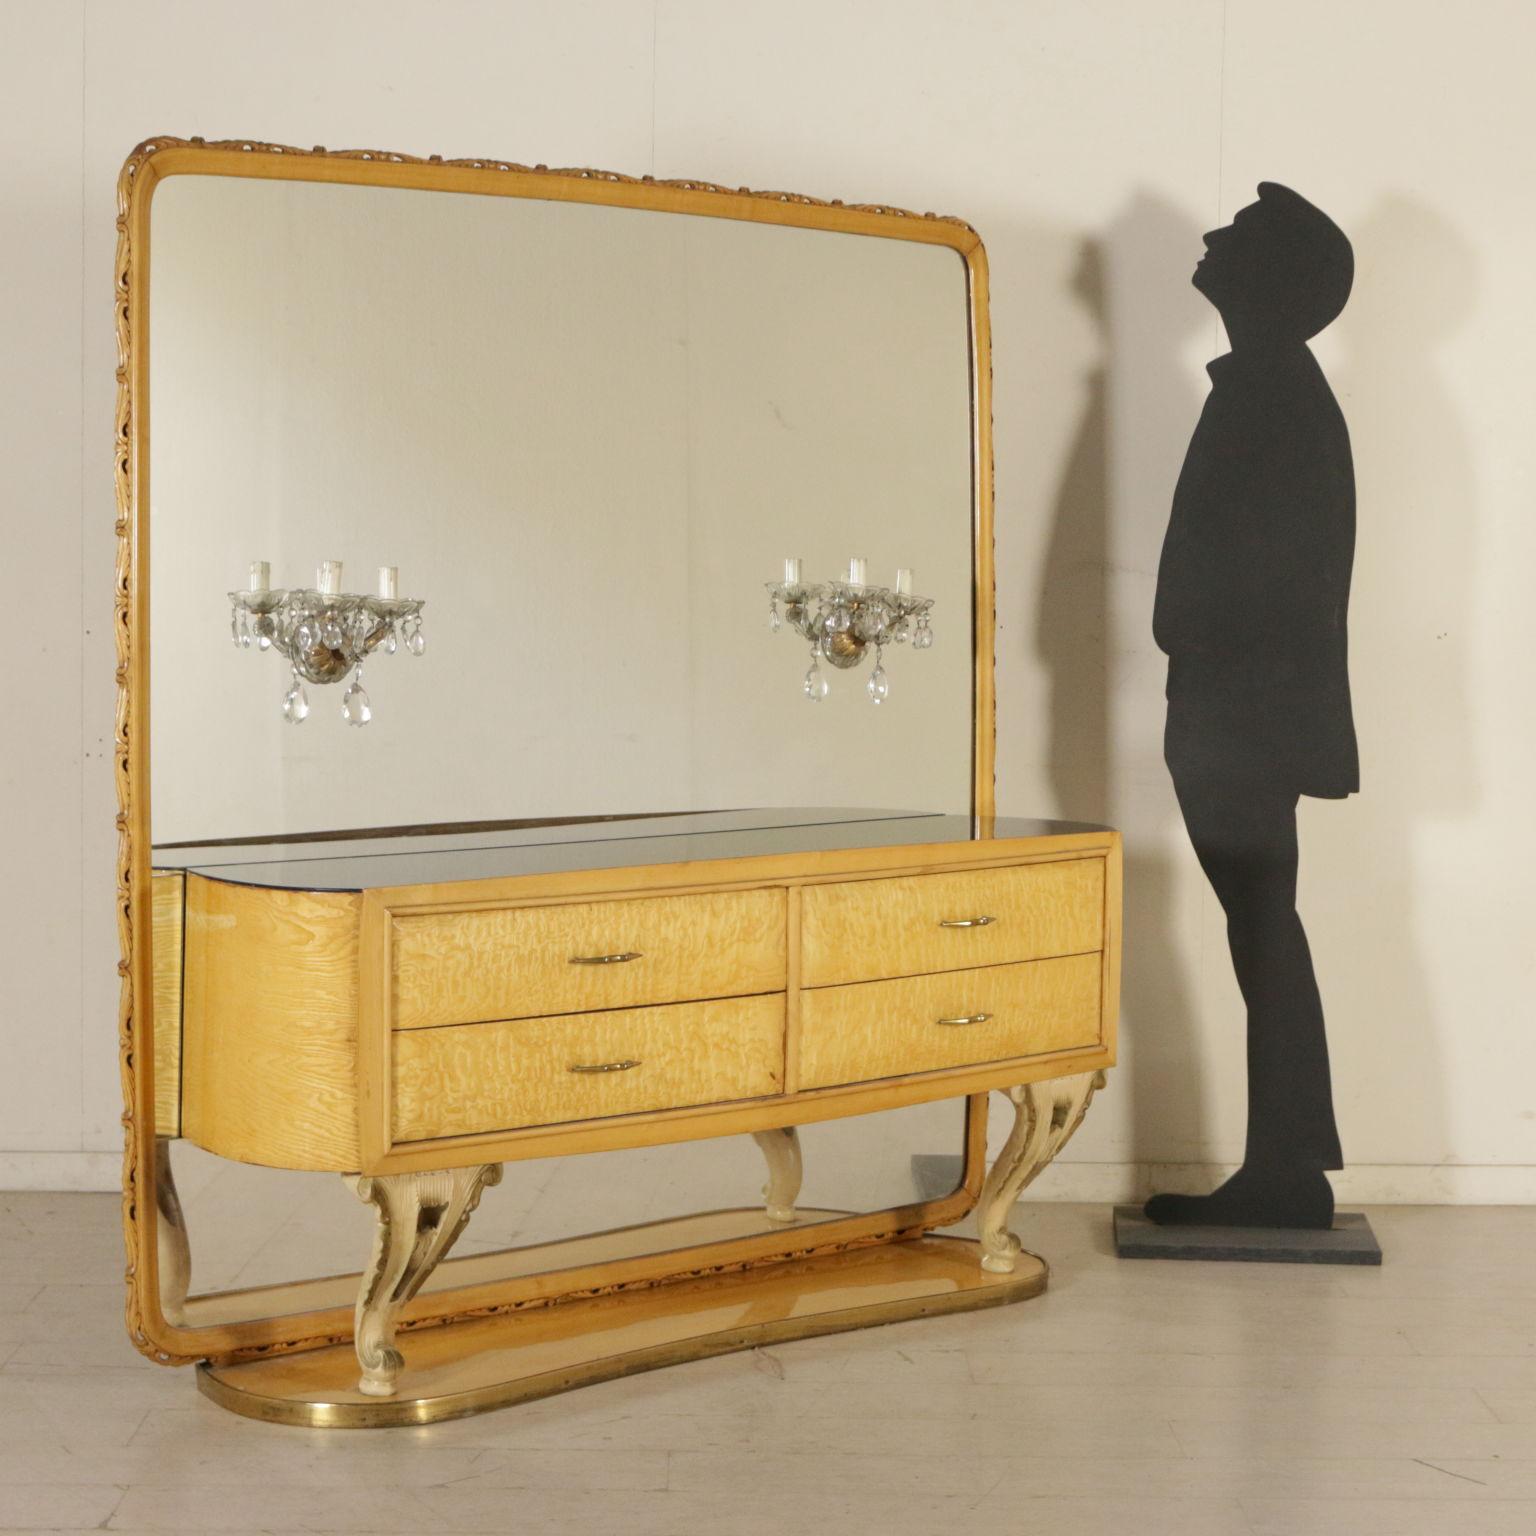 A buffet with mirror, revival. Briar-root veneer, carved legs, retro treated glass. Manufactured in Italy, 1950s.